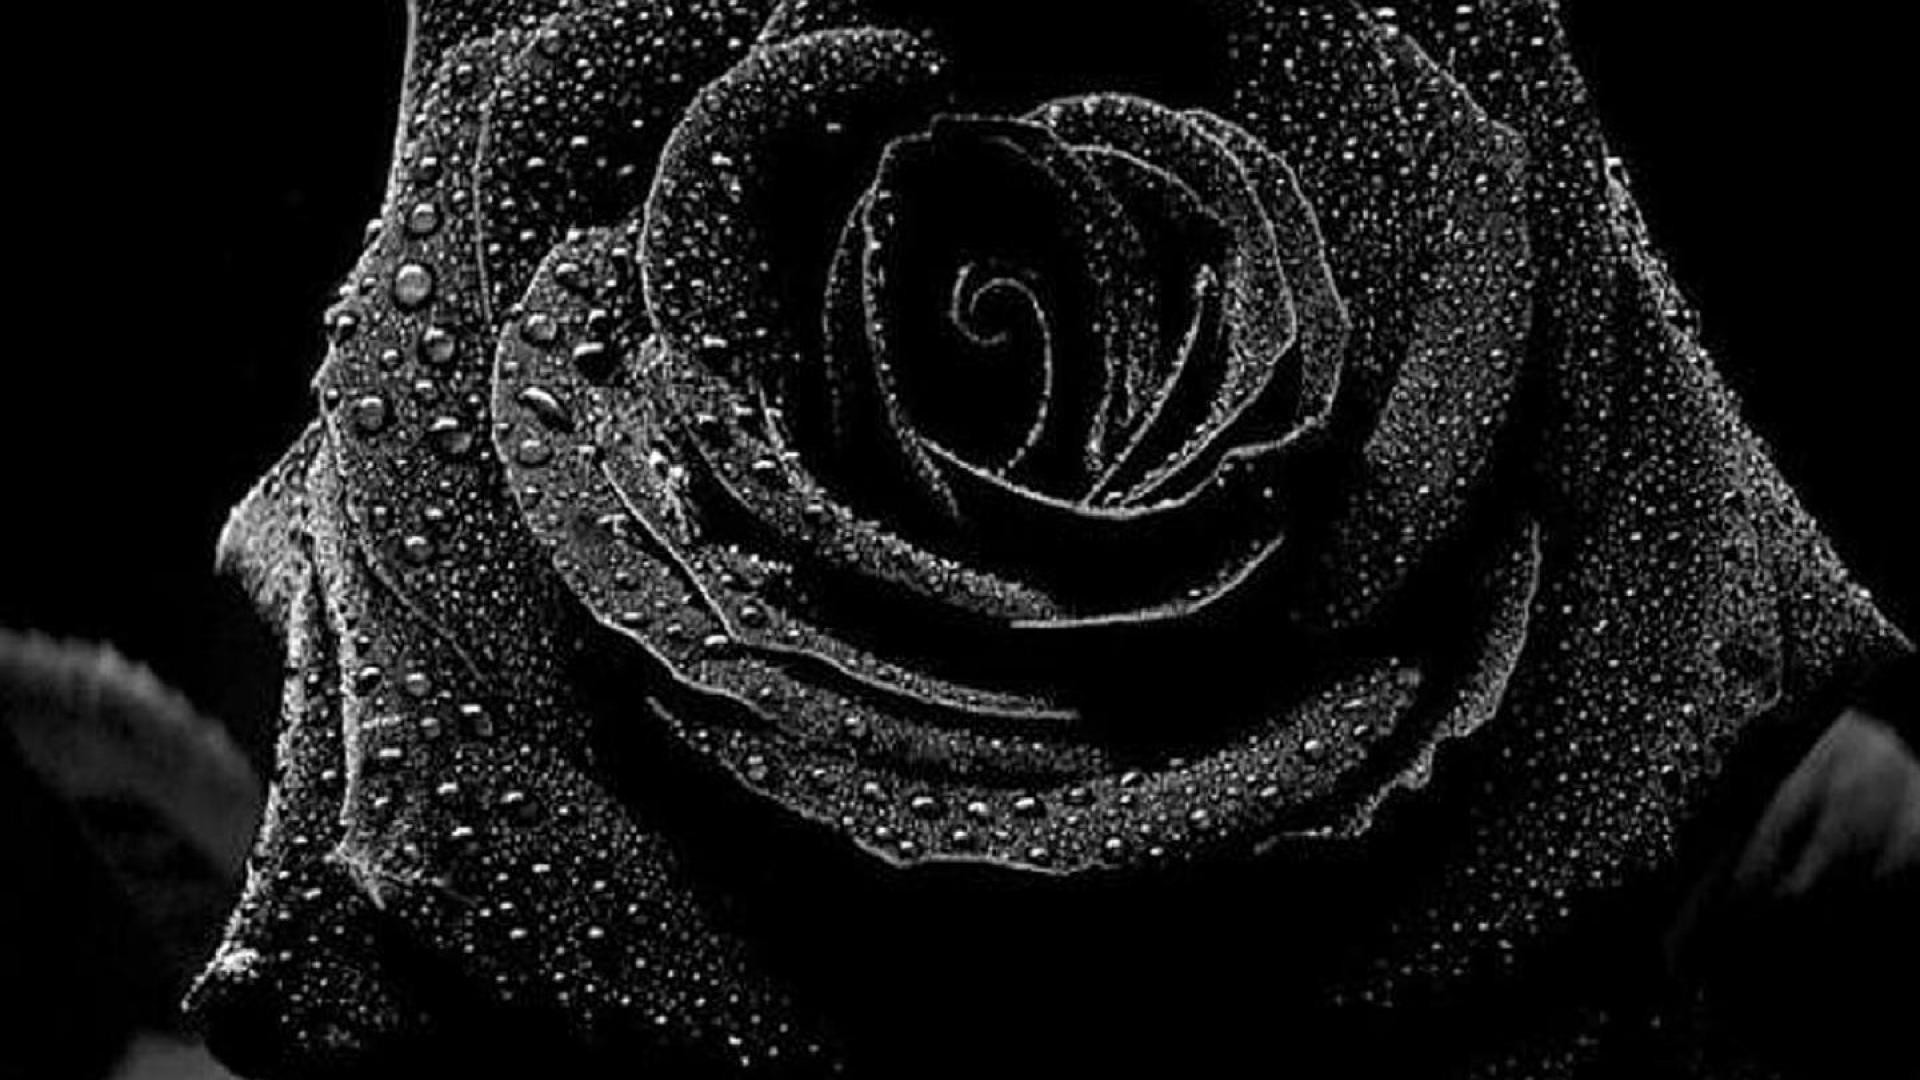 Black and White Rose Wallpaper (61+ images)